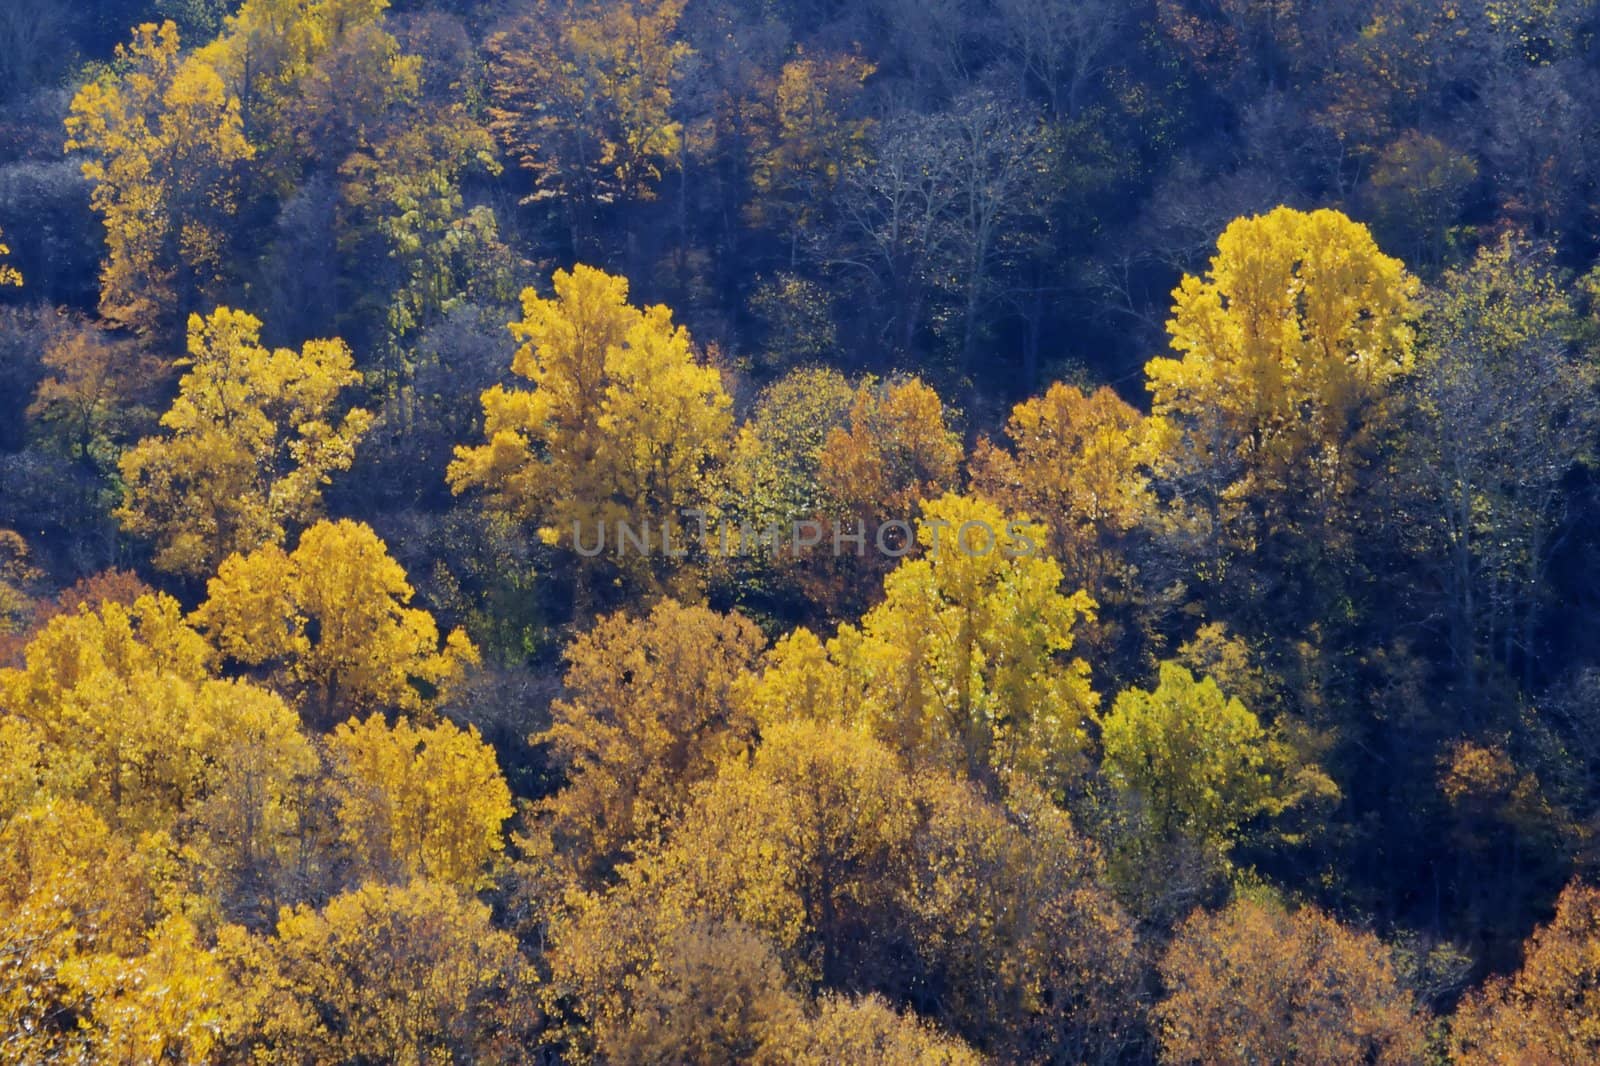 A forest full of yelow autumn colors. by jasony00